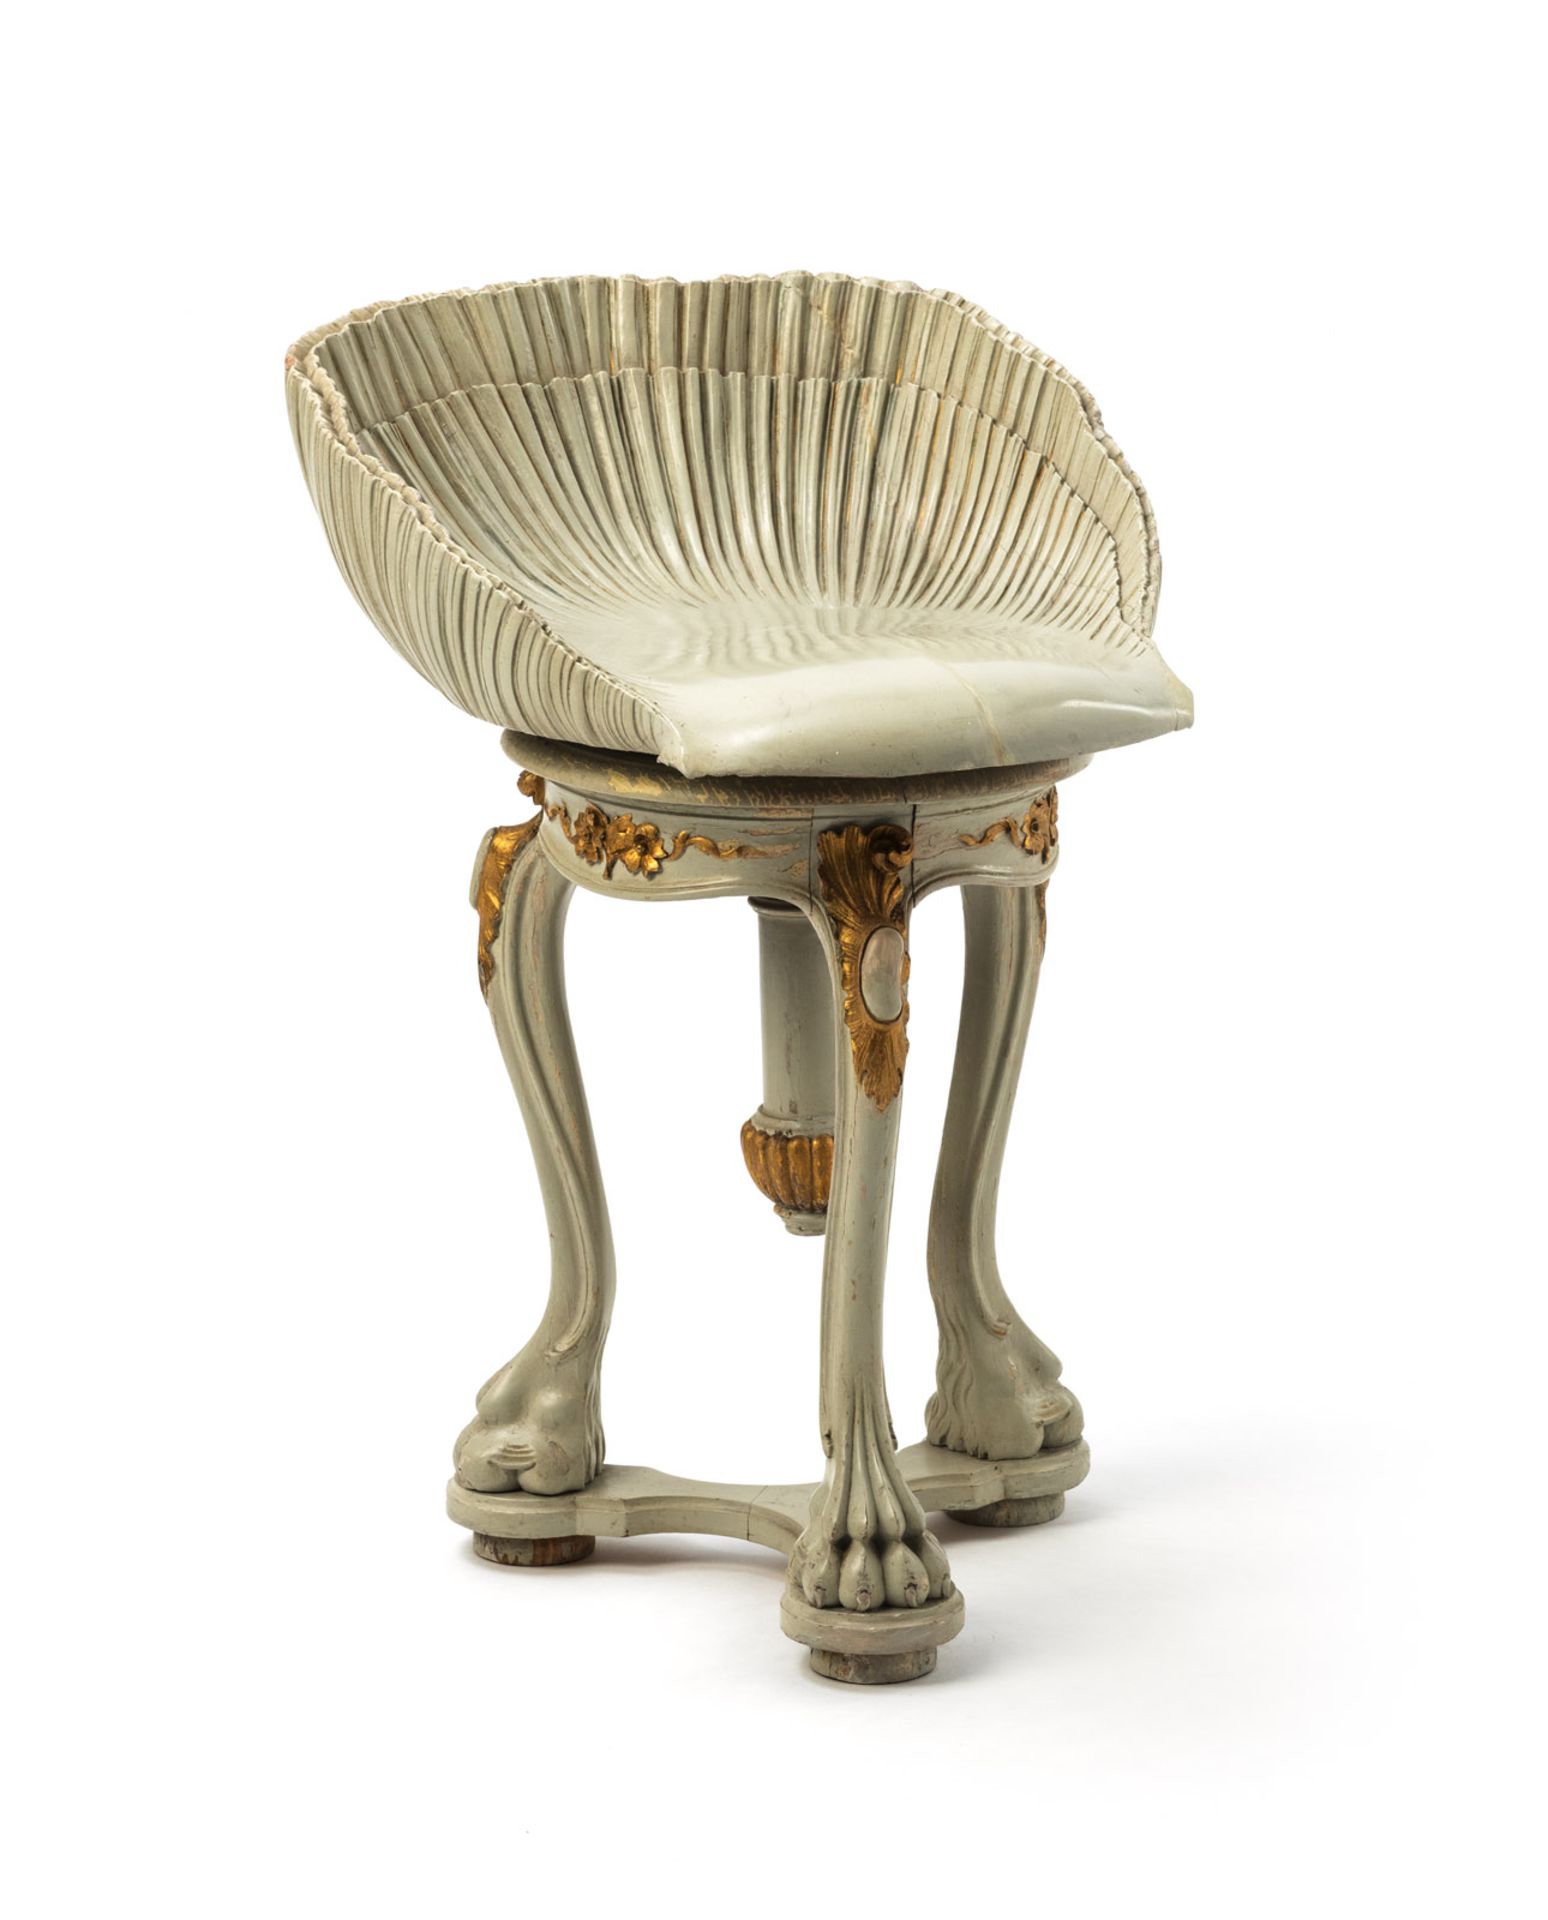 A BAROQUE STYLE PIANO STOOL WITH SHELL SHAPED SEAT